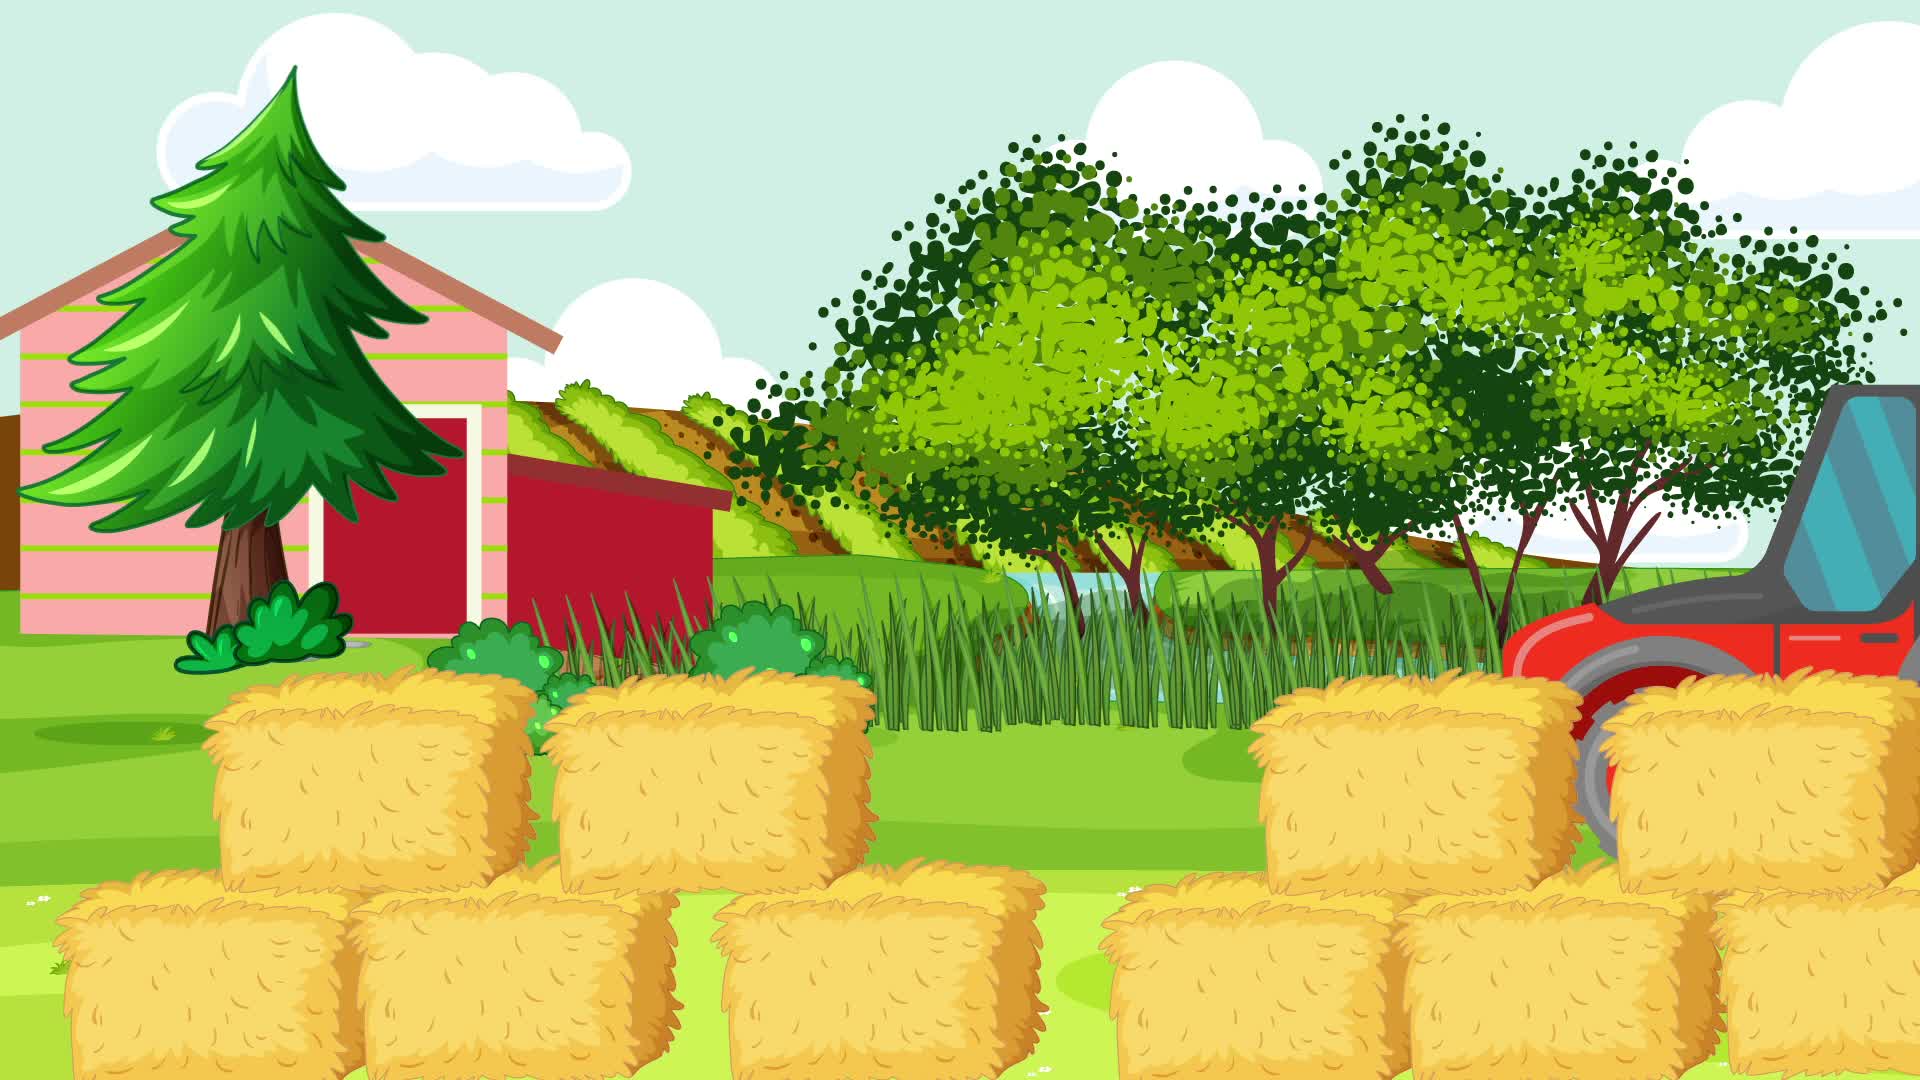 Farm Cartoon Stock Video Footage for Free Download